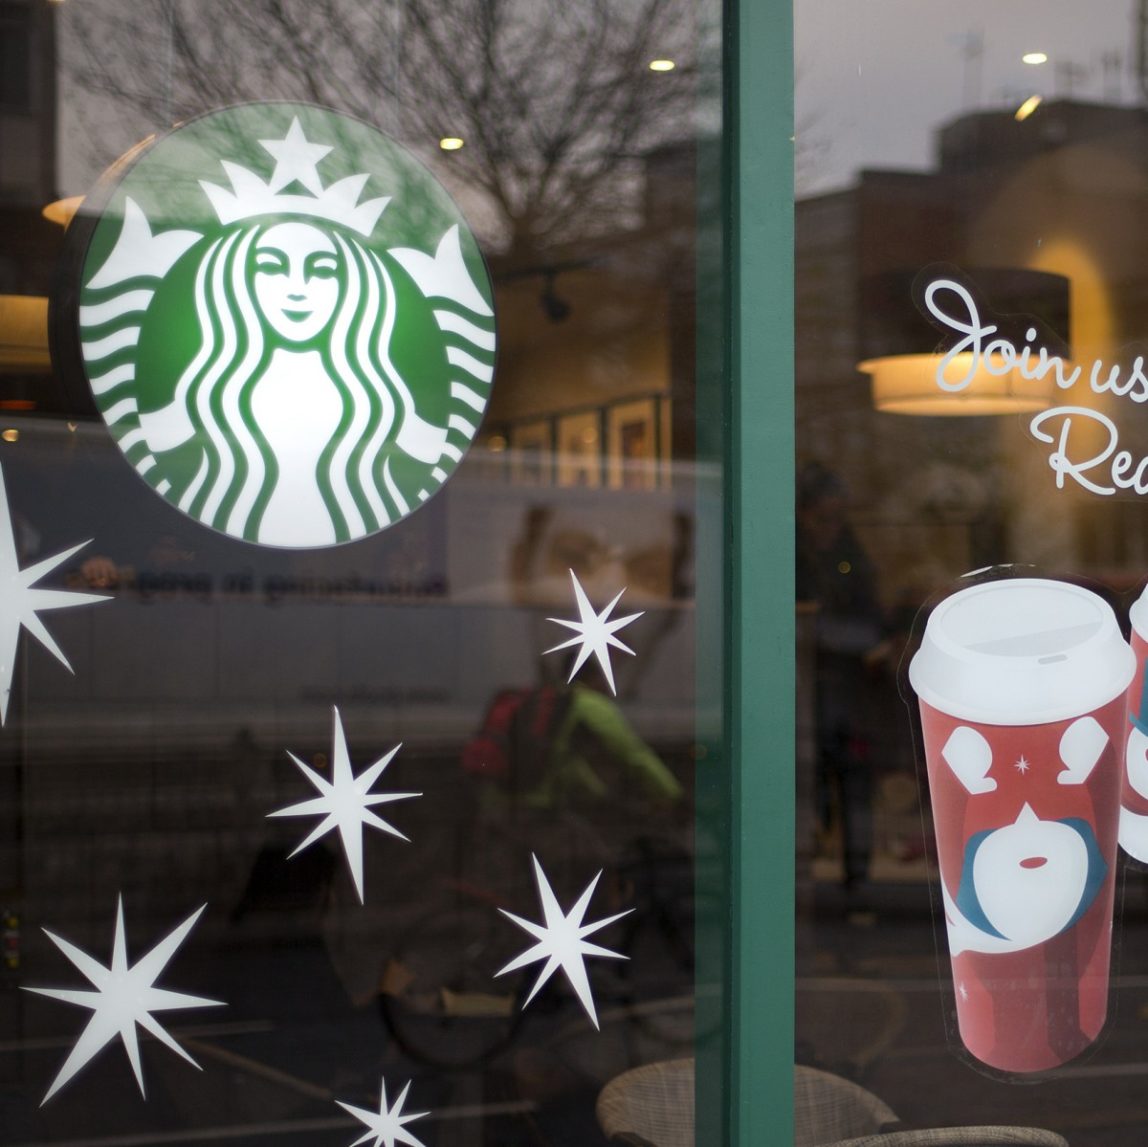 A man walks out of a Starbucks coffee cafe holding a drink in west London, Monday, Dec. 3, 2012. (AP Photo/Alastair Grant)